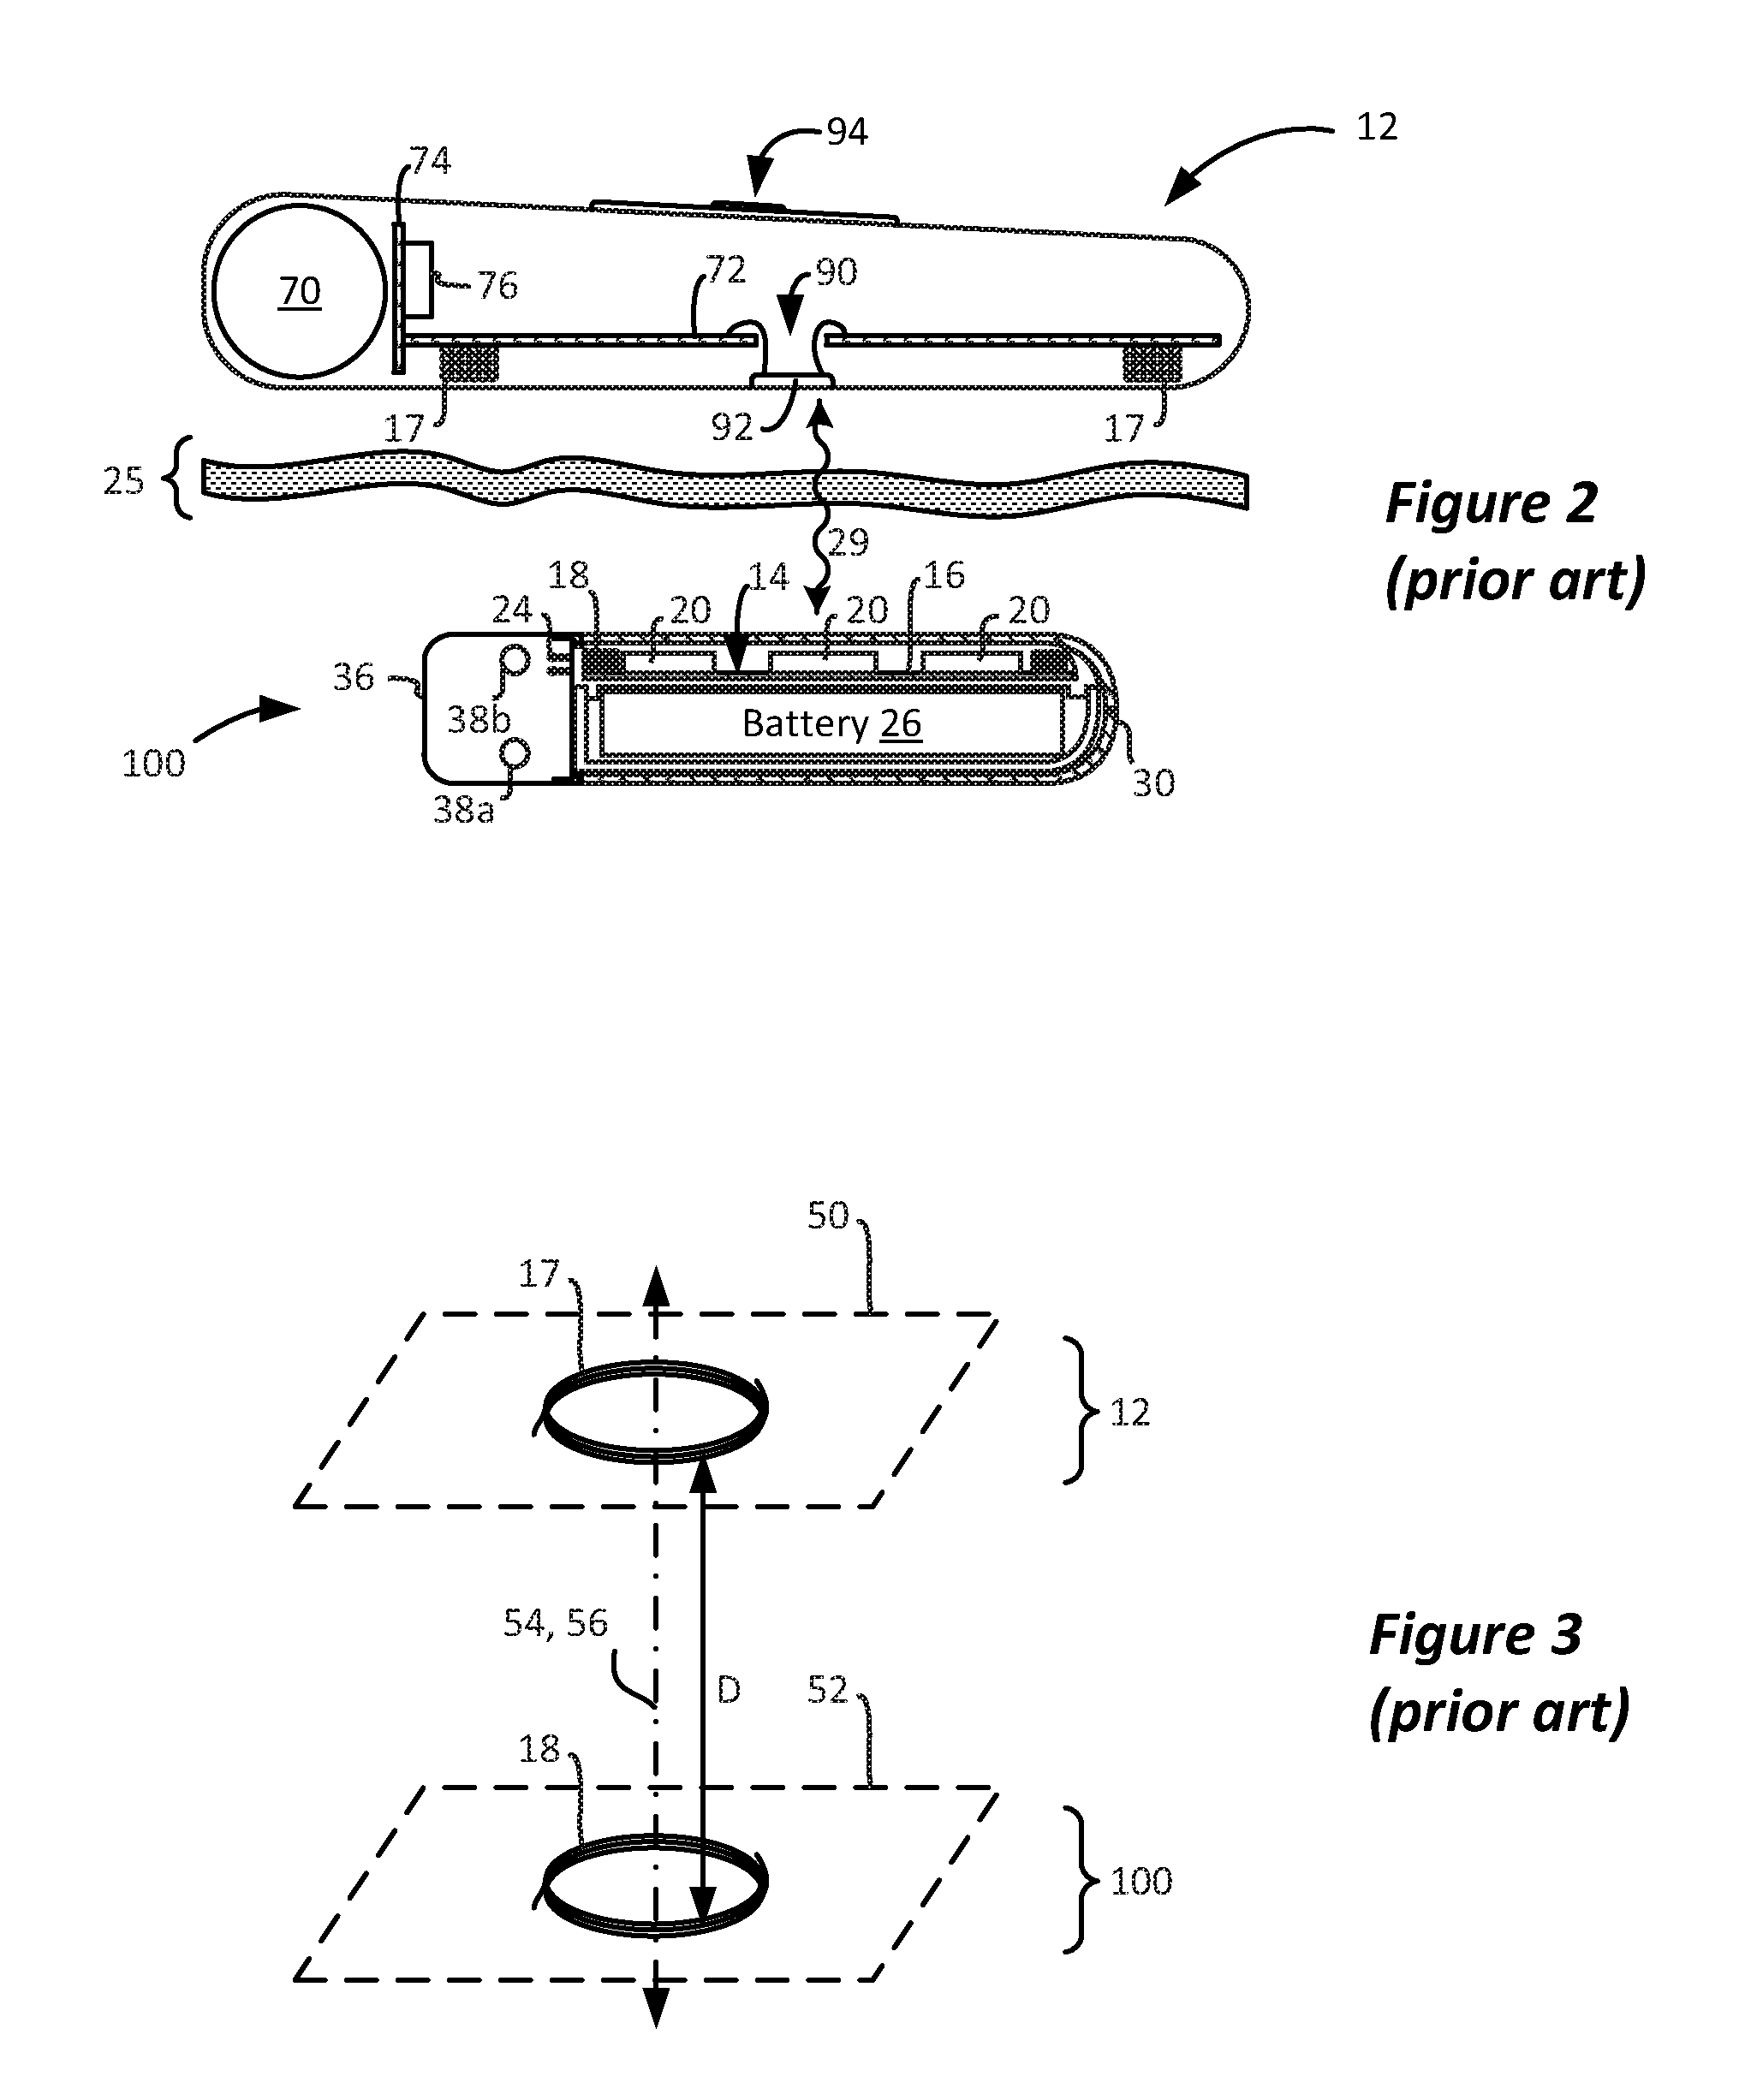 External Charger Usable with an Implantable Medical Device Having a Programmable or Time-Varying Temperature Set Point